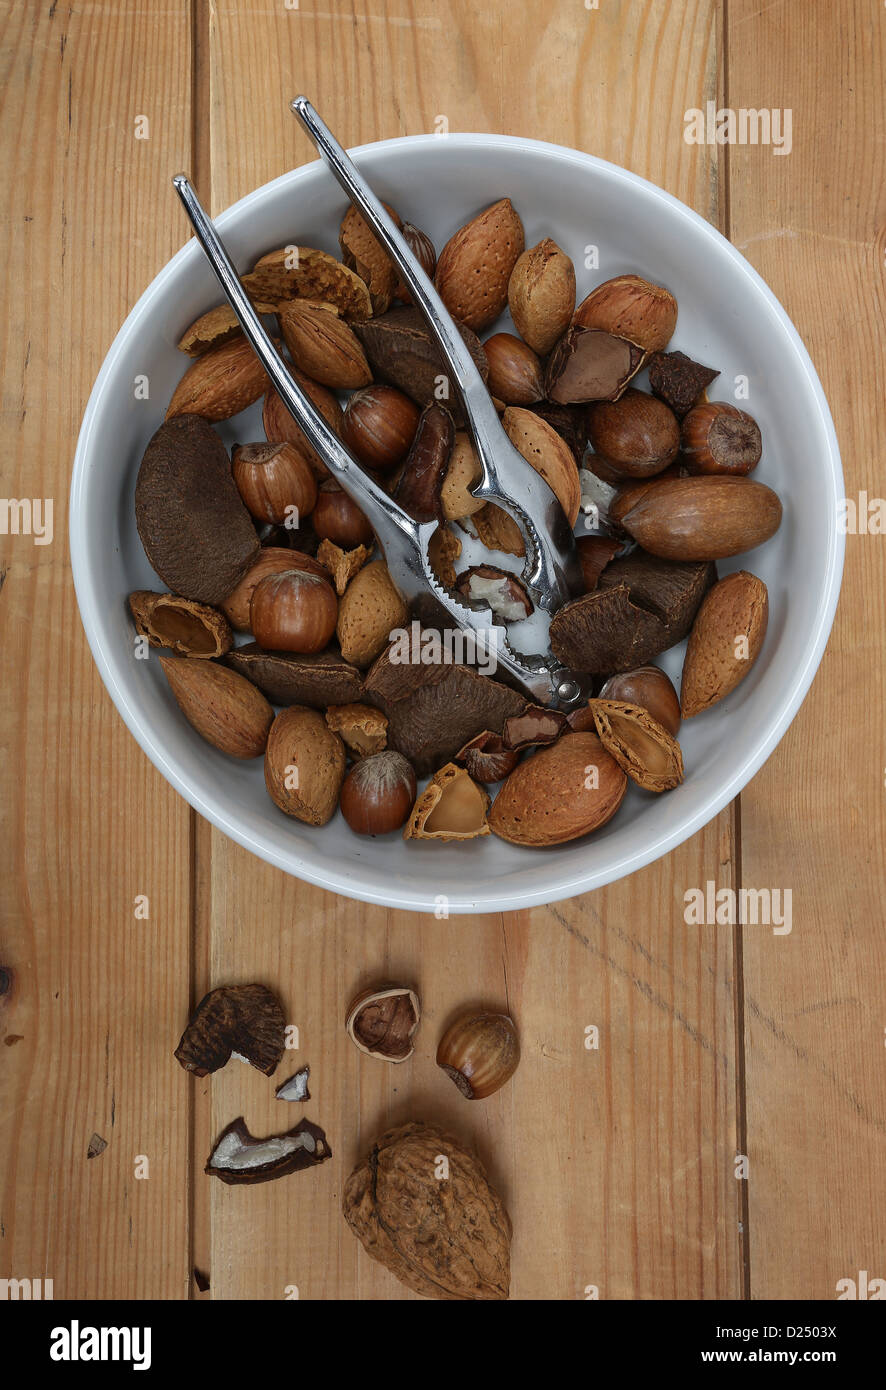 mixed nuts in a white bowl with a metal nut cracker, photographed on old wood Stock Photo